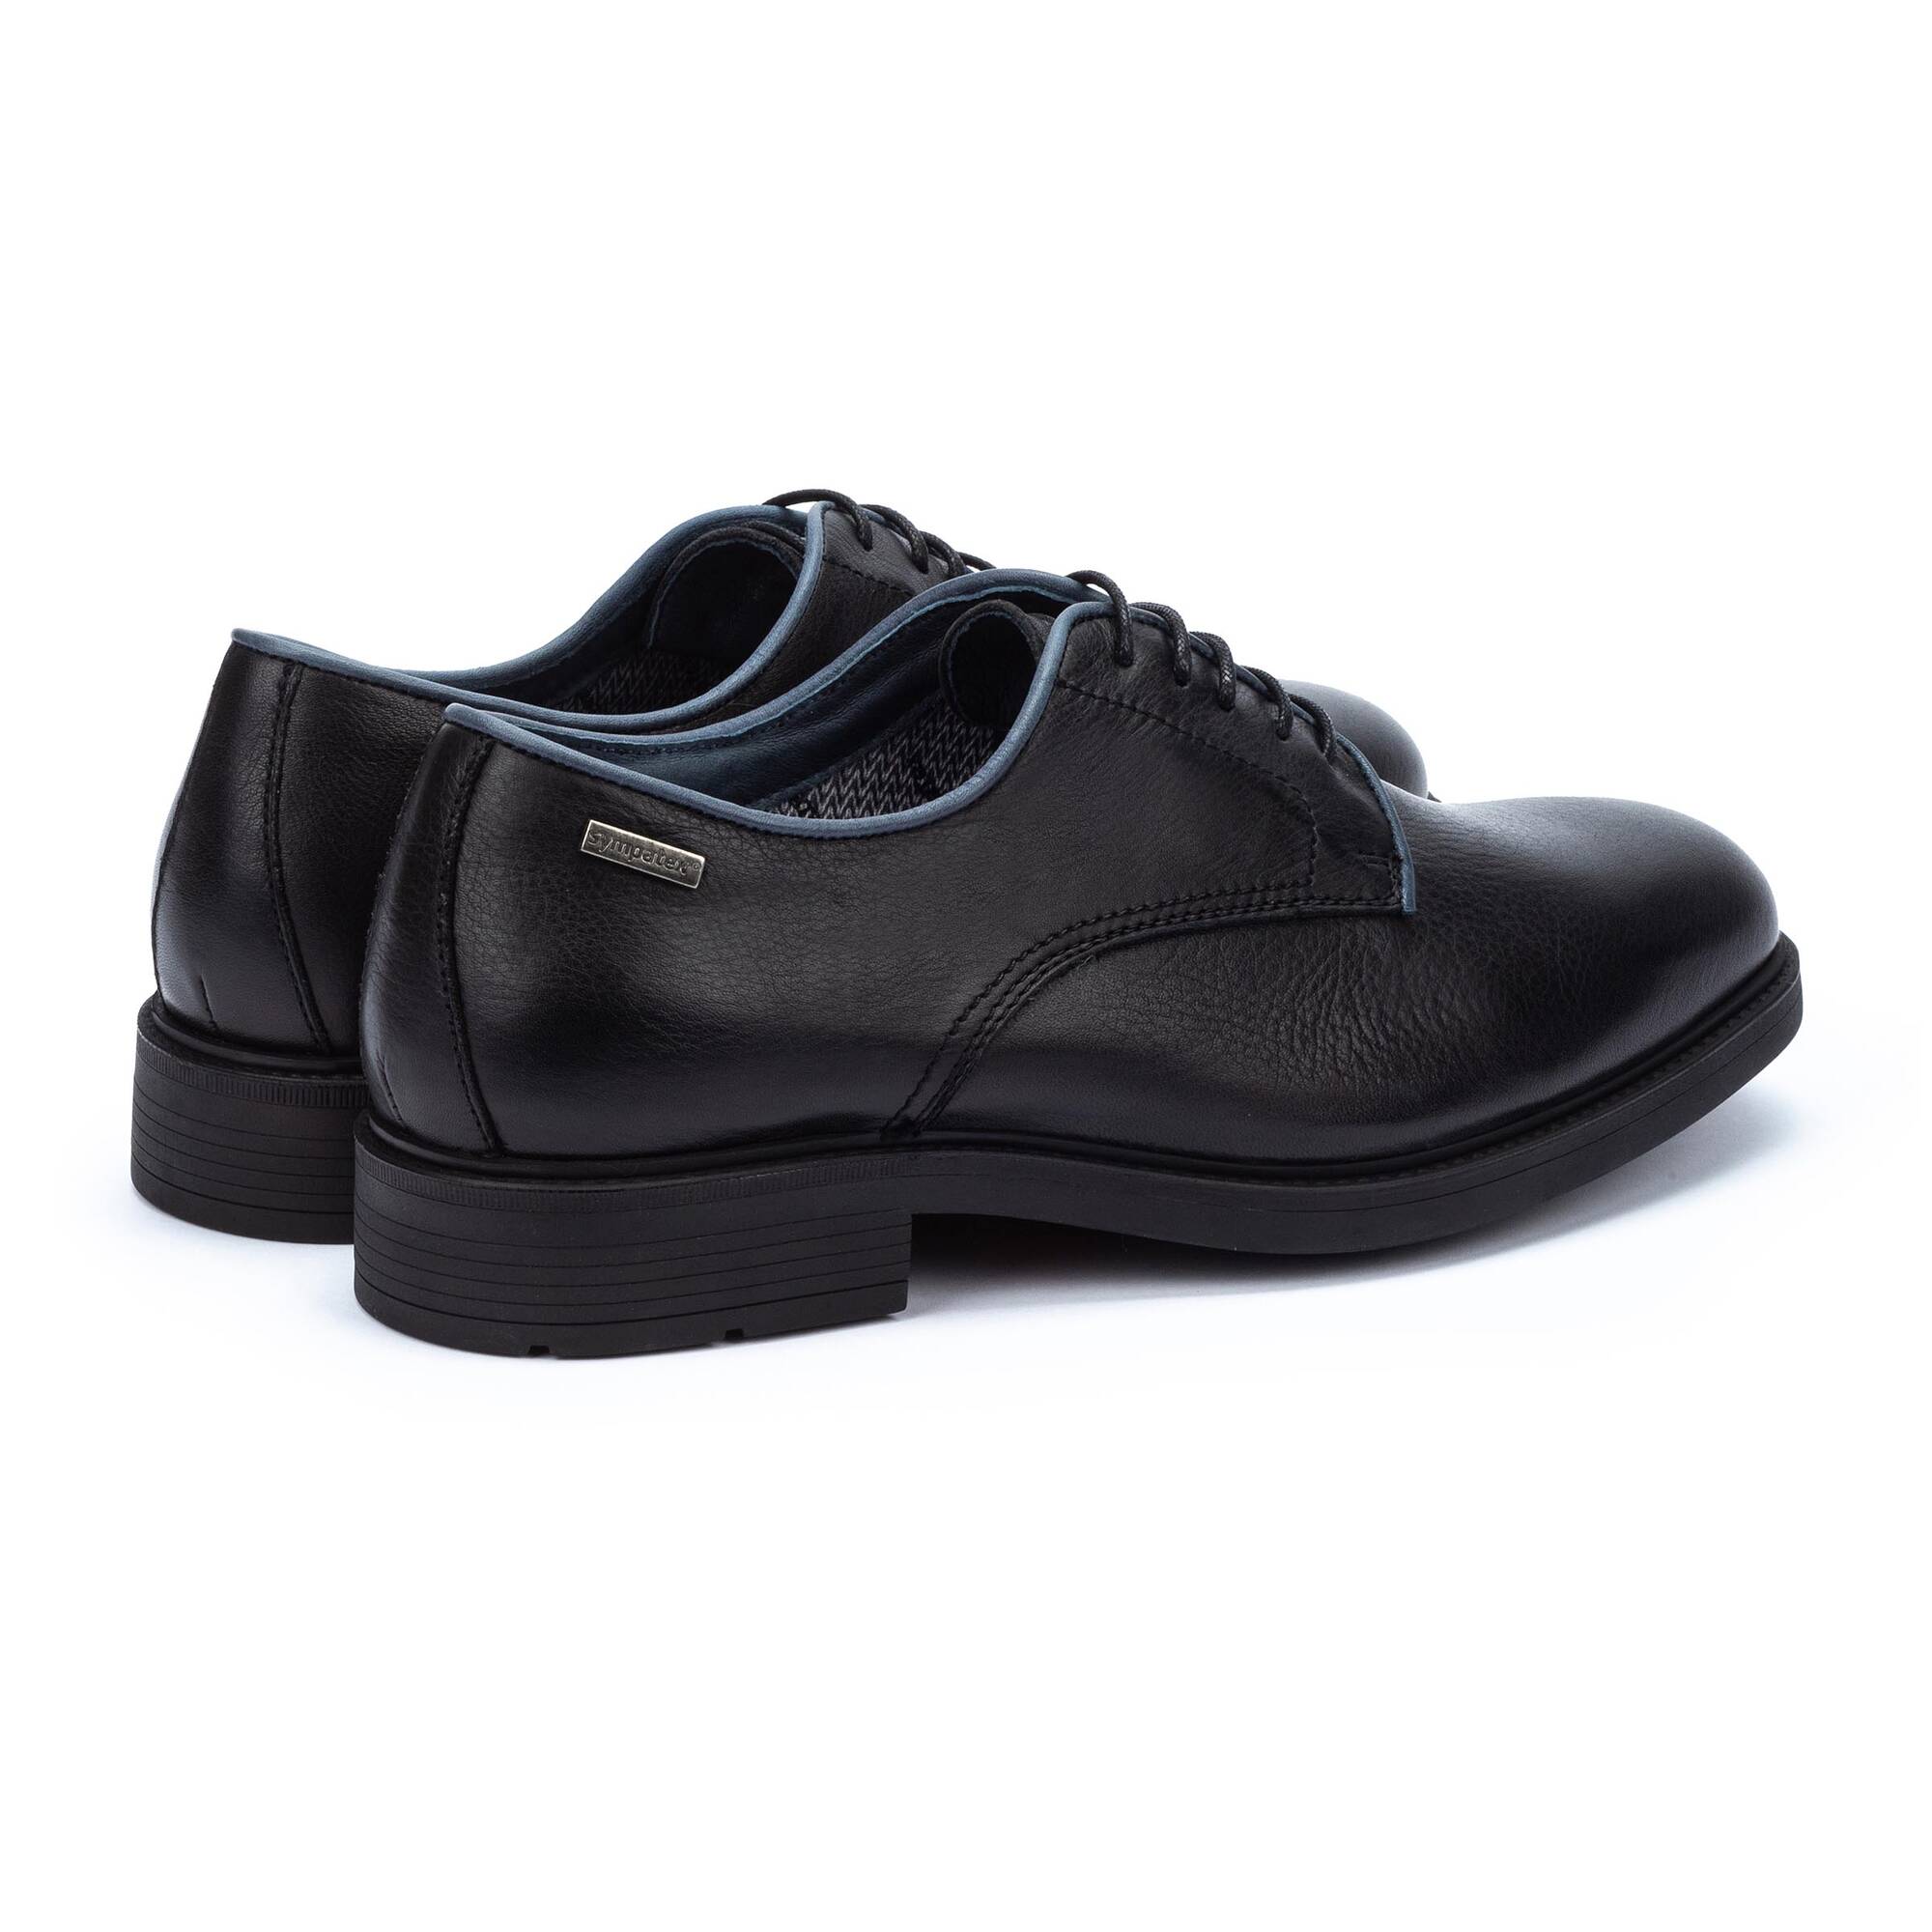 Smart shoes | LORCA 02N-SY6130, BLACK, large image number 30 | null